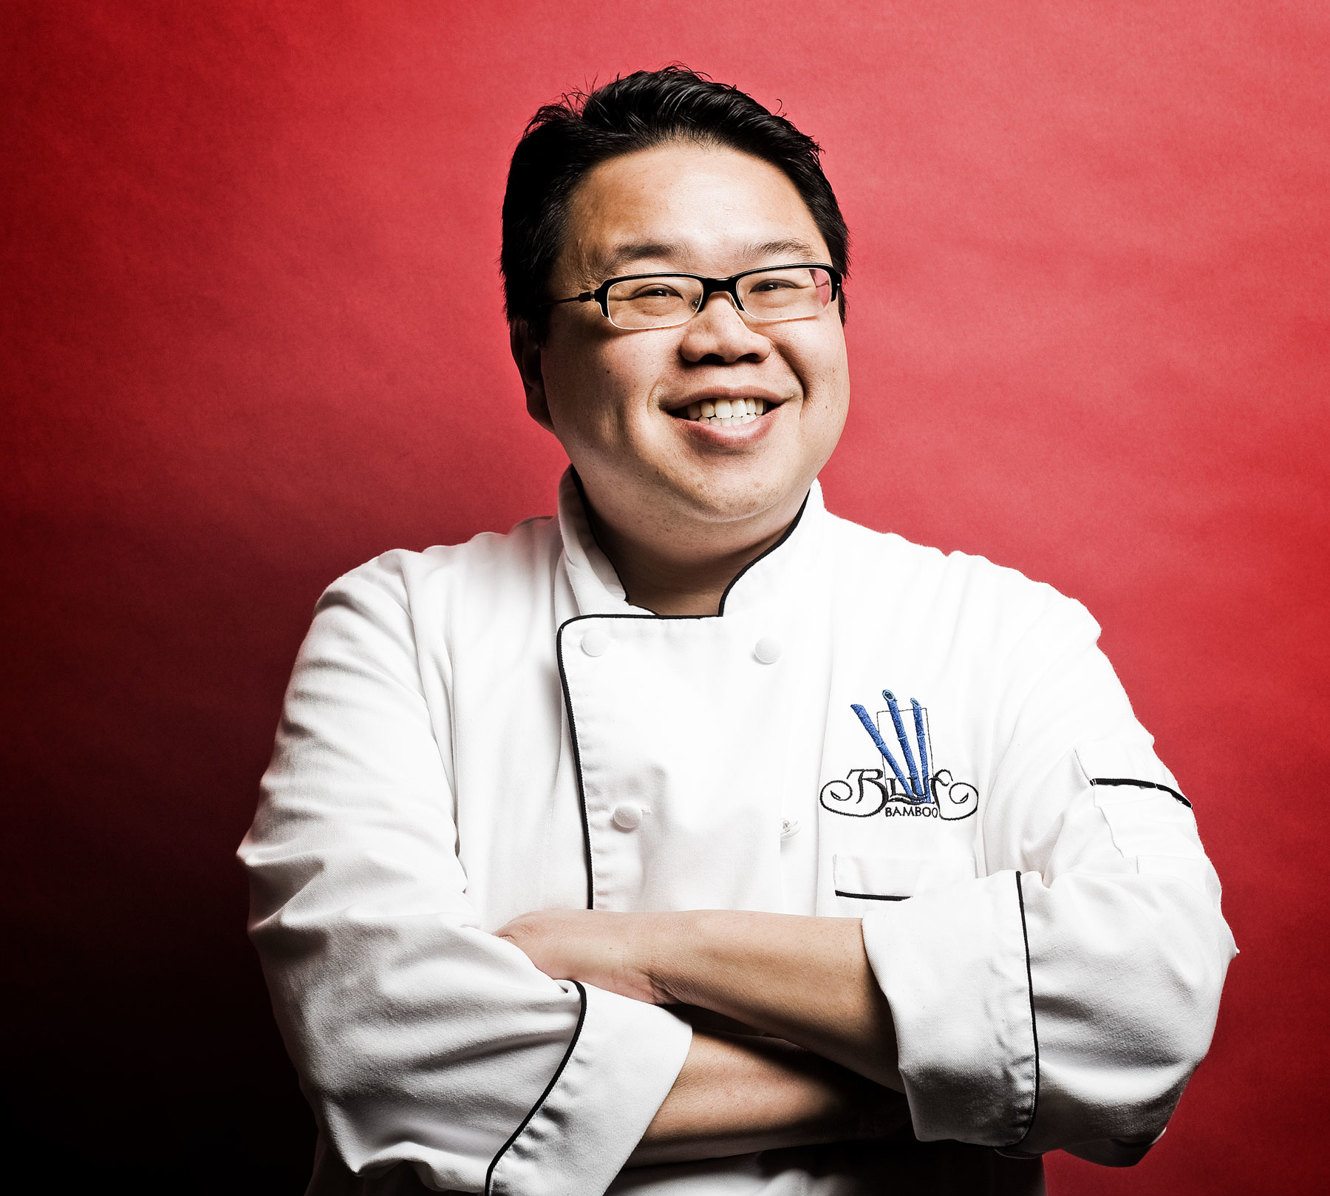 Blue Bamboo chef and owner Dennis Chan